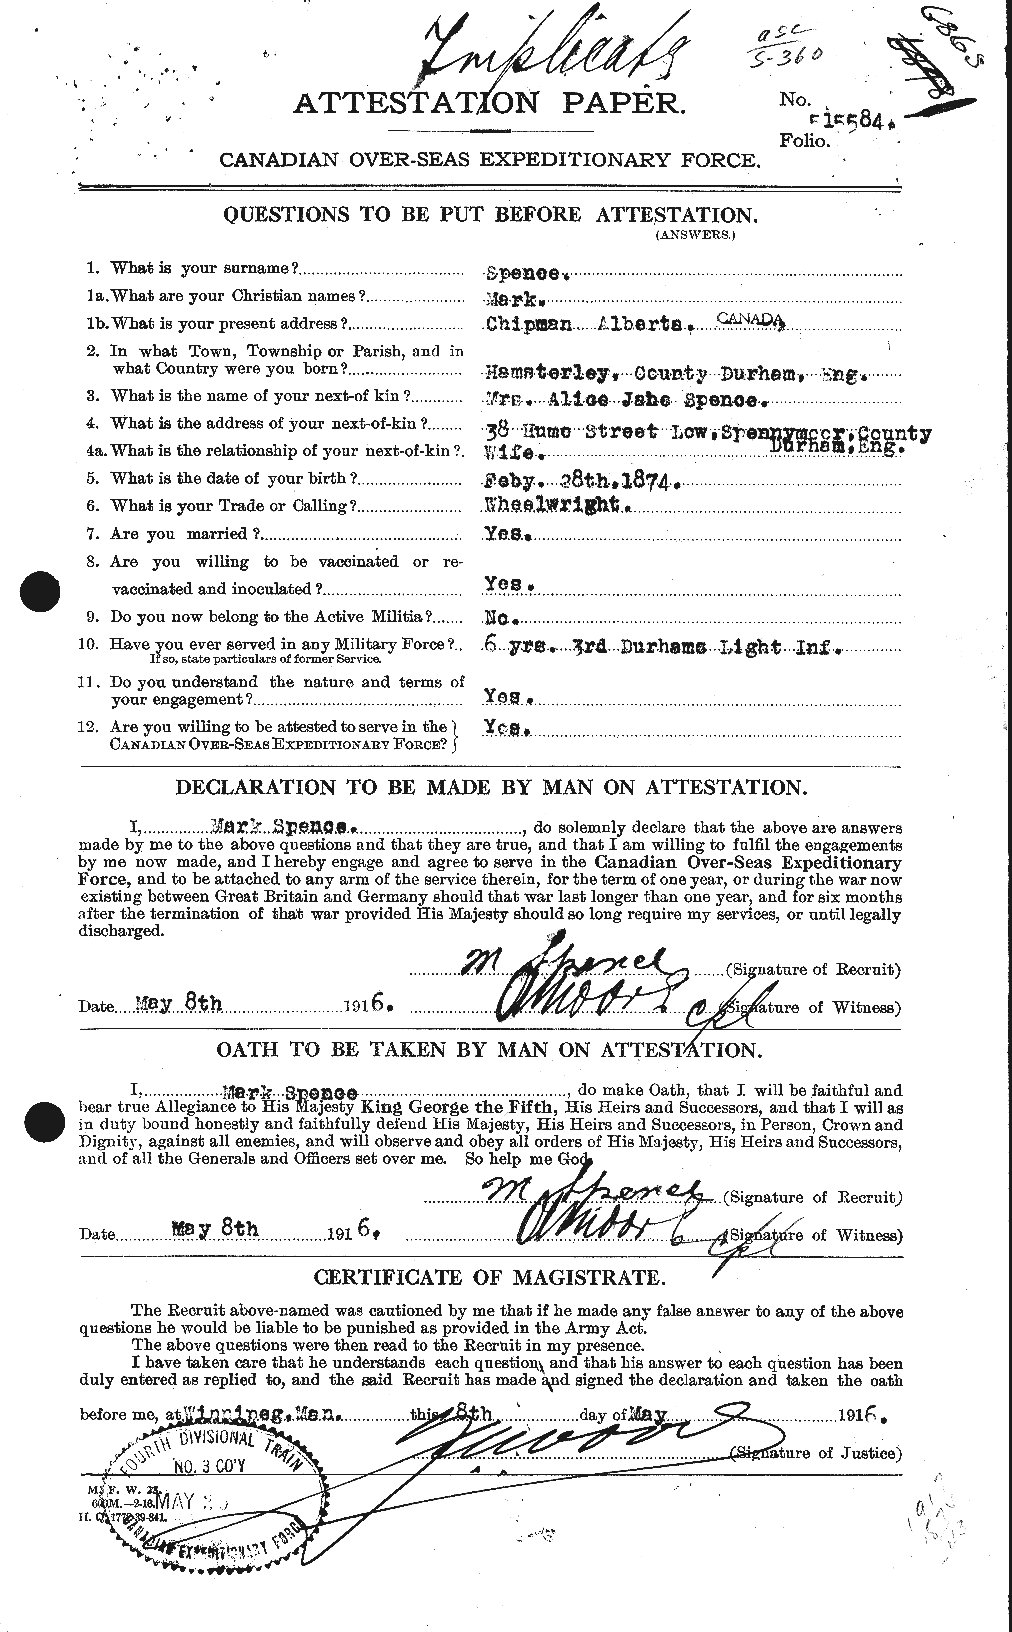 Personnel Records of the First World War - CEF 621394a